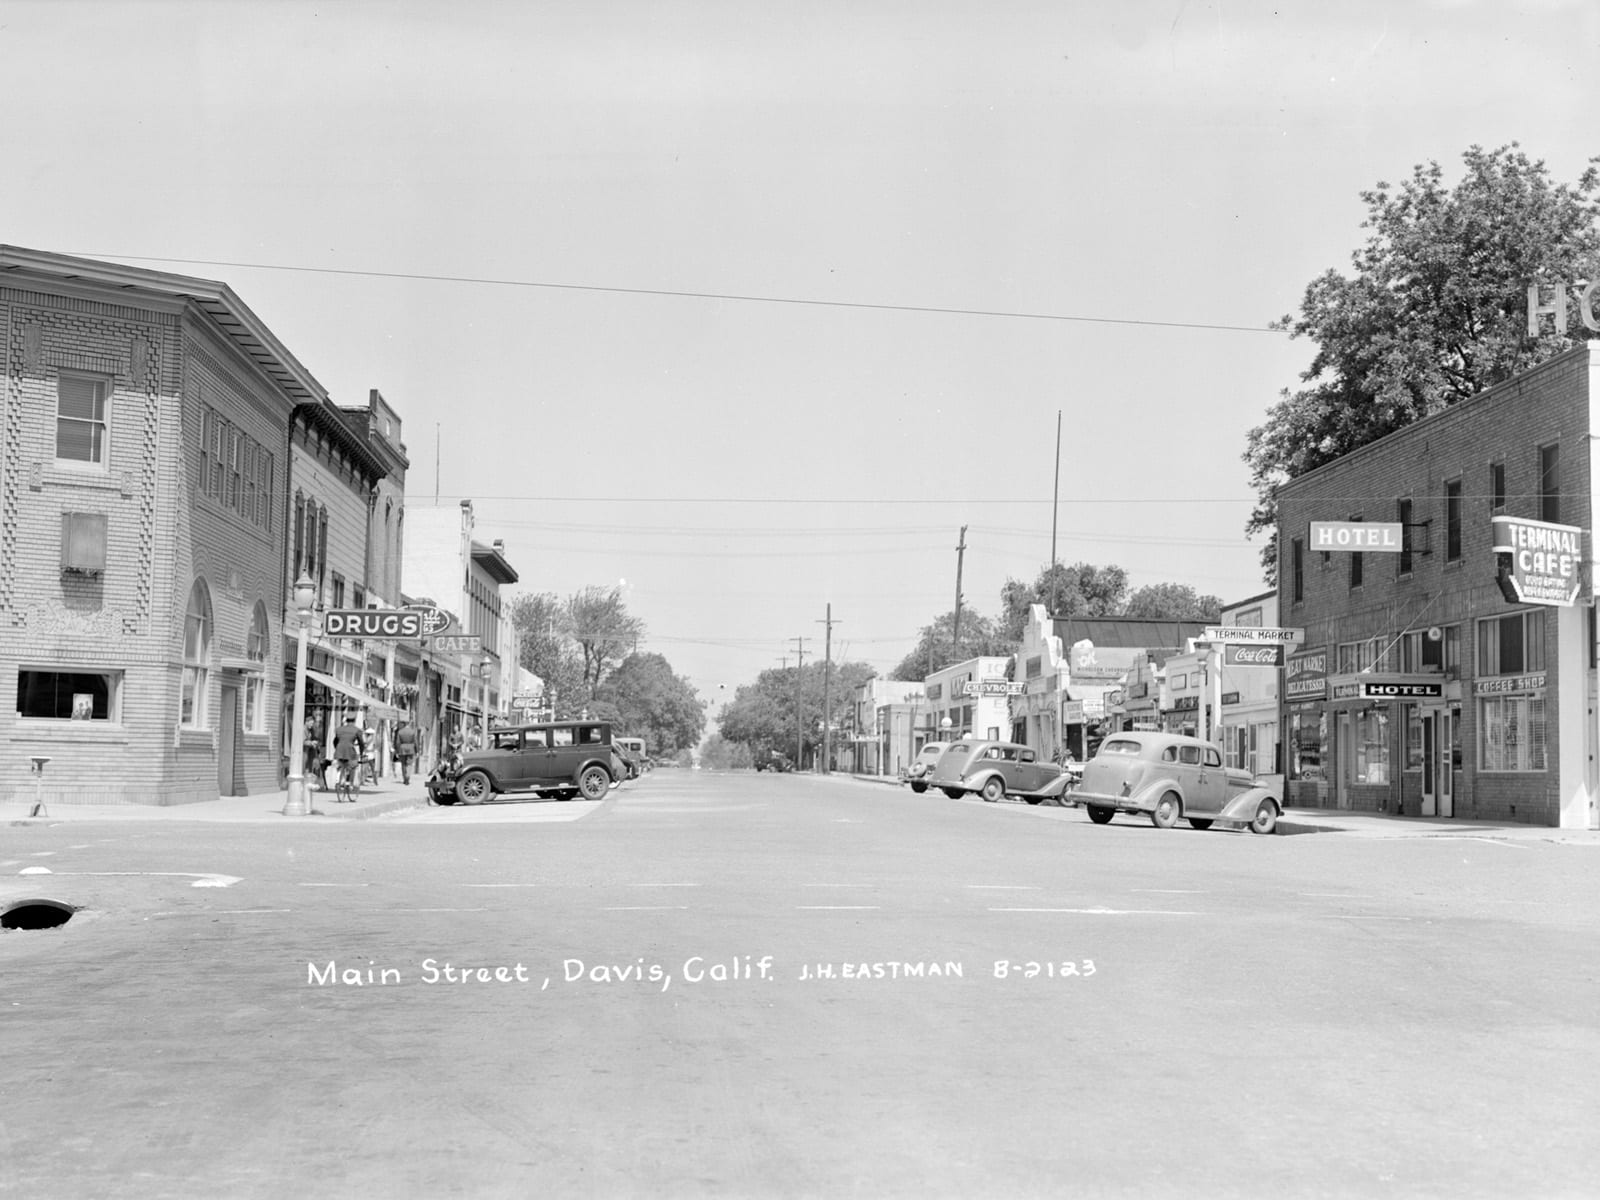 G street at Second Street, looking north, 1944